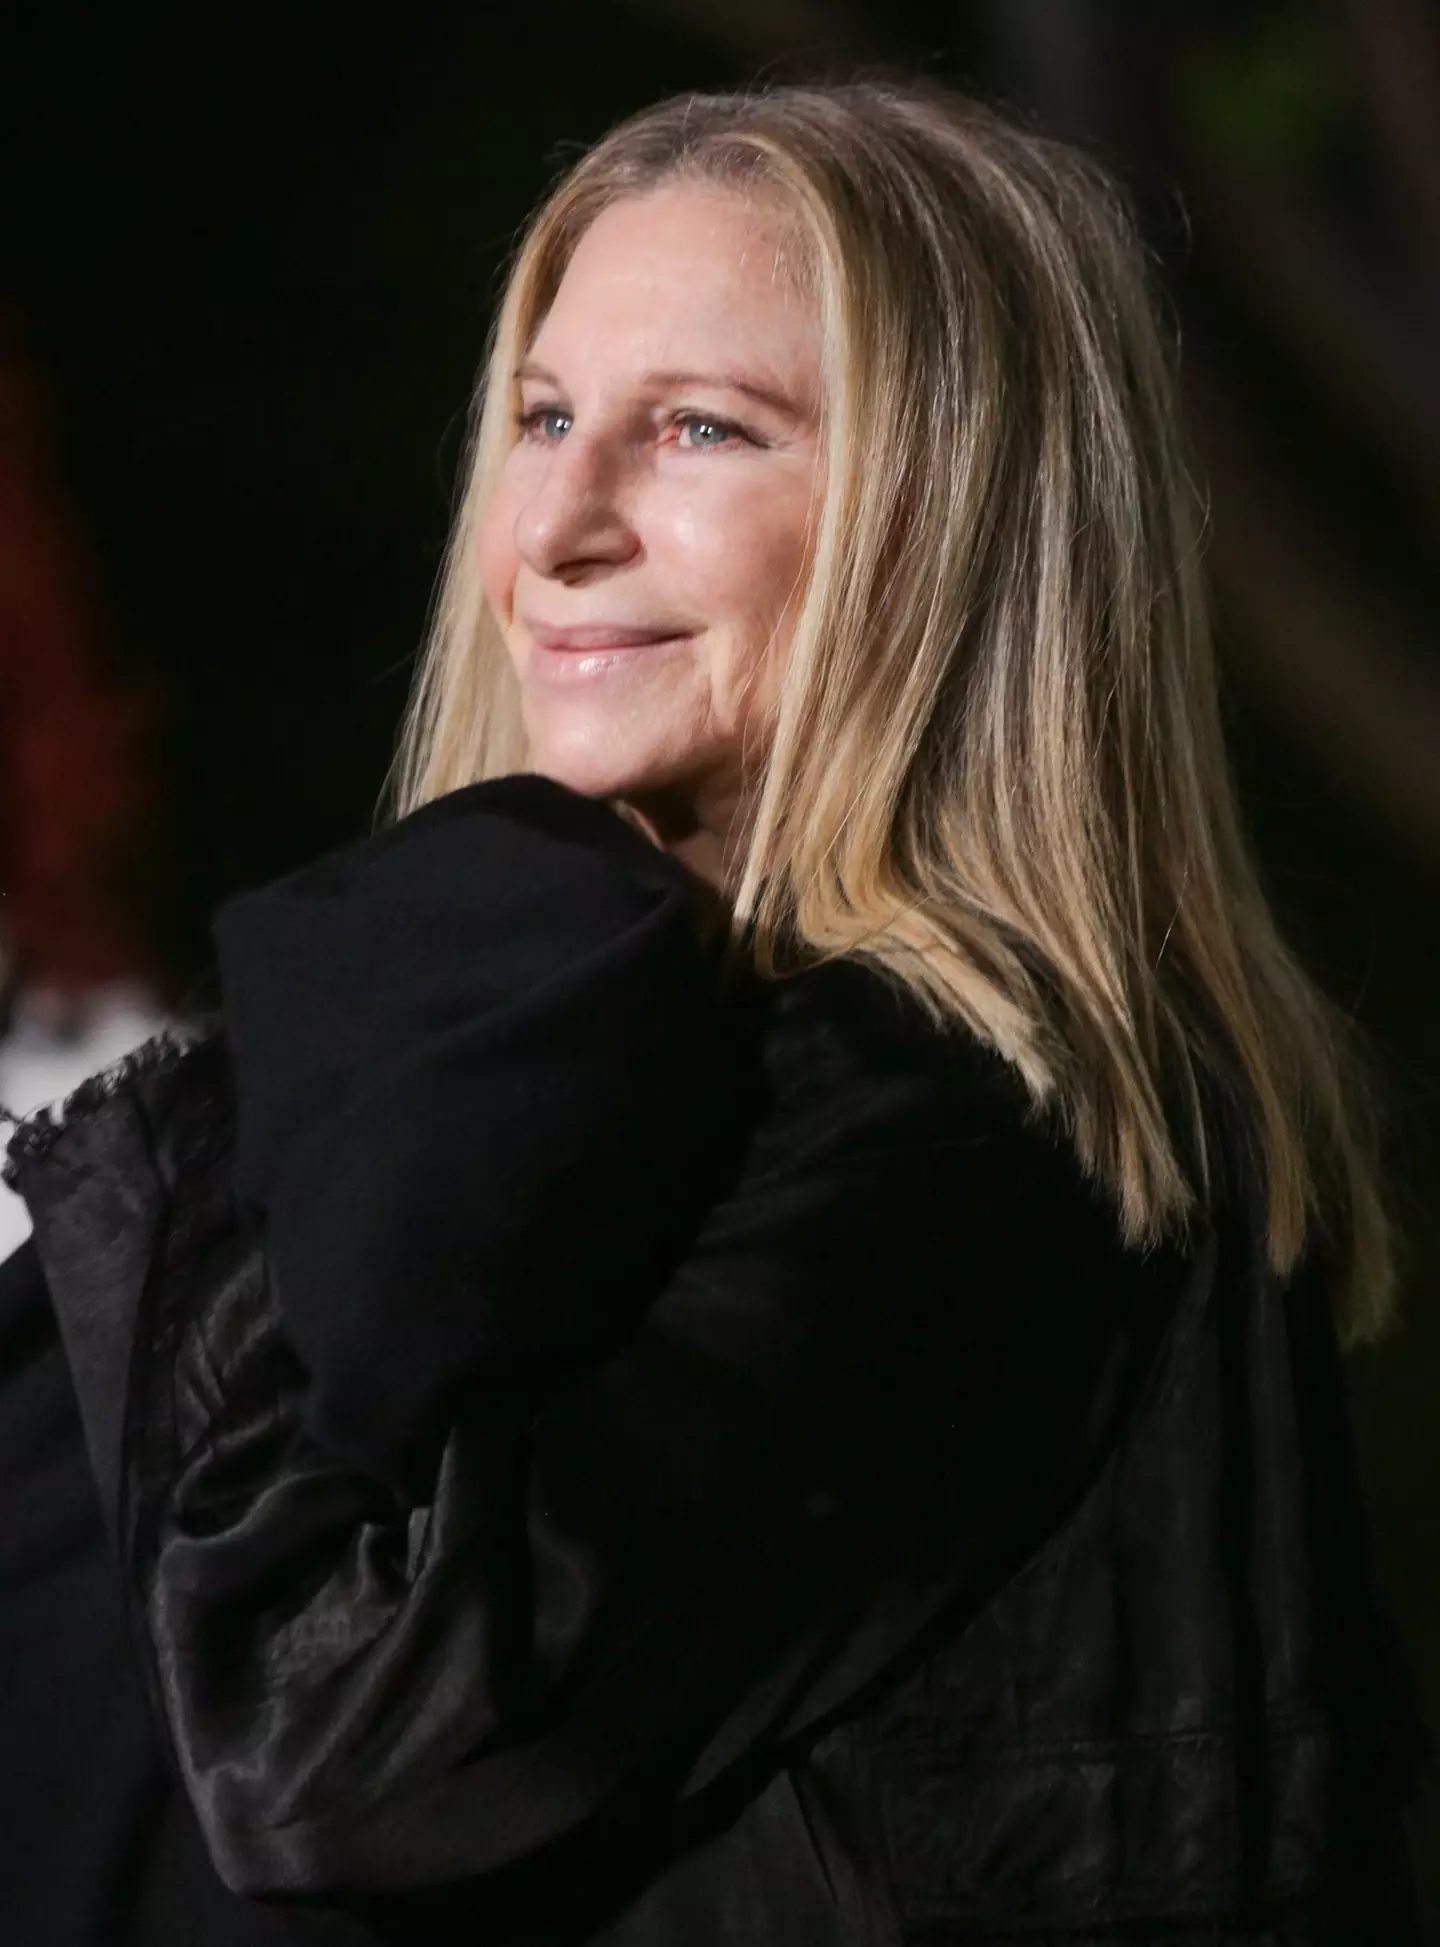 Barbra has come under fire for her comments. (Rich Fury/Getty Images)